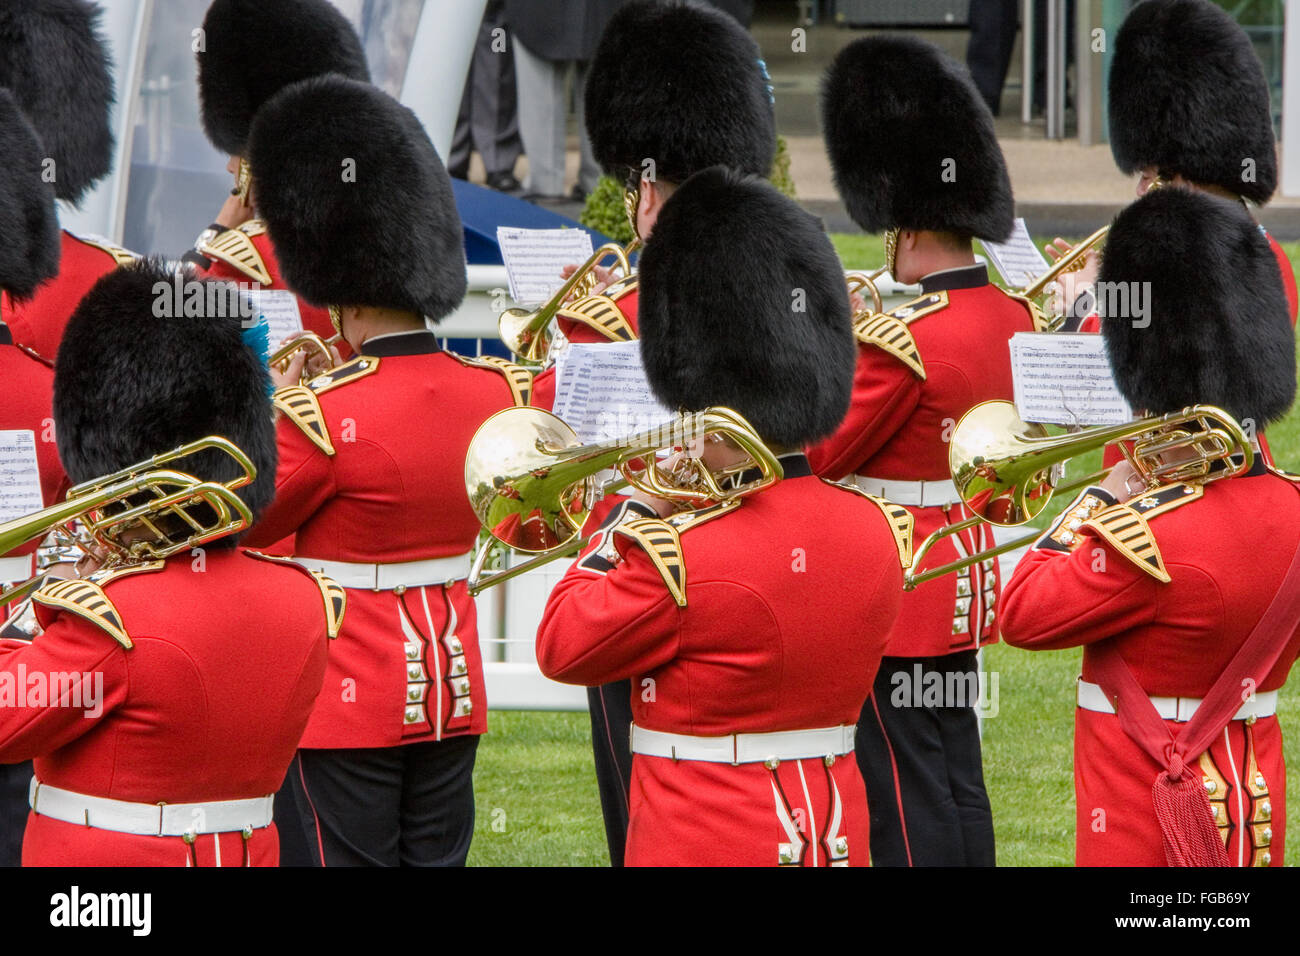 National,anthem,at,sporting,event,events,military,band,Royal Ascot horse race meeting,Ascot,Berkshire,England,U.K. Europe. Stock Photo